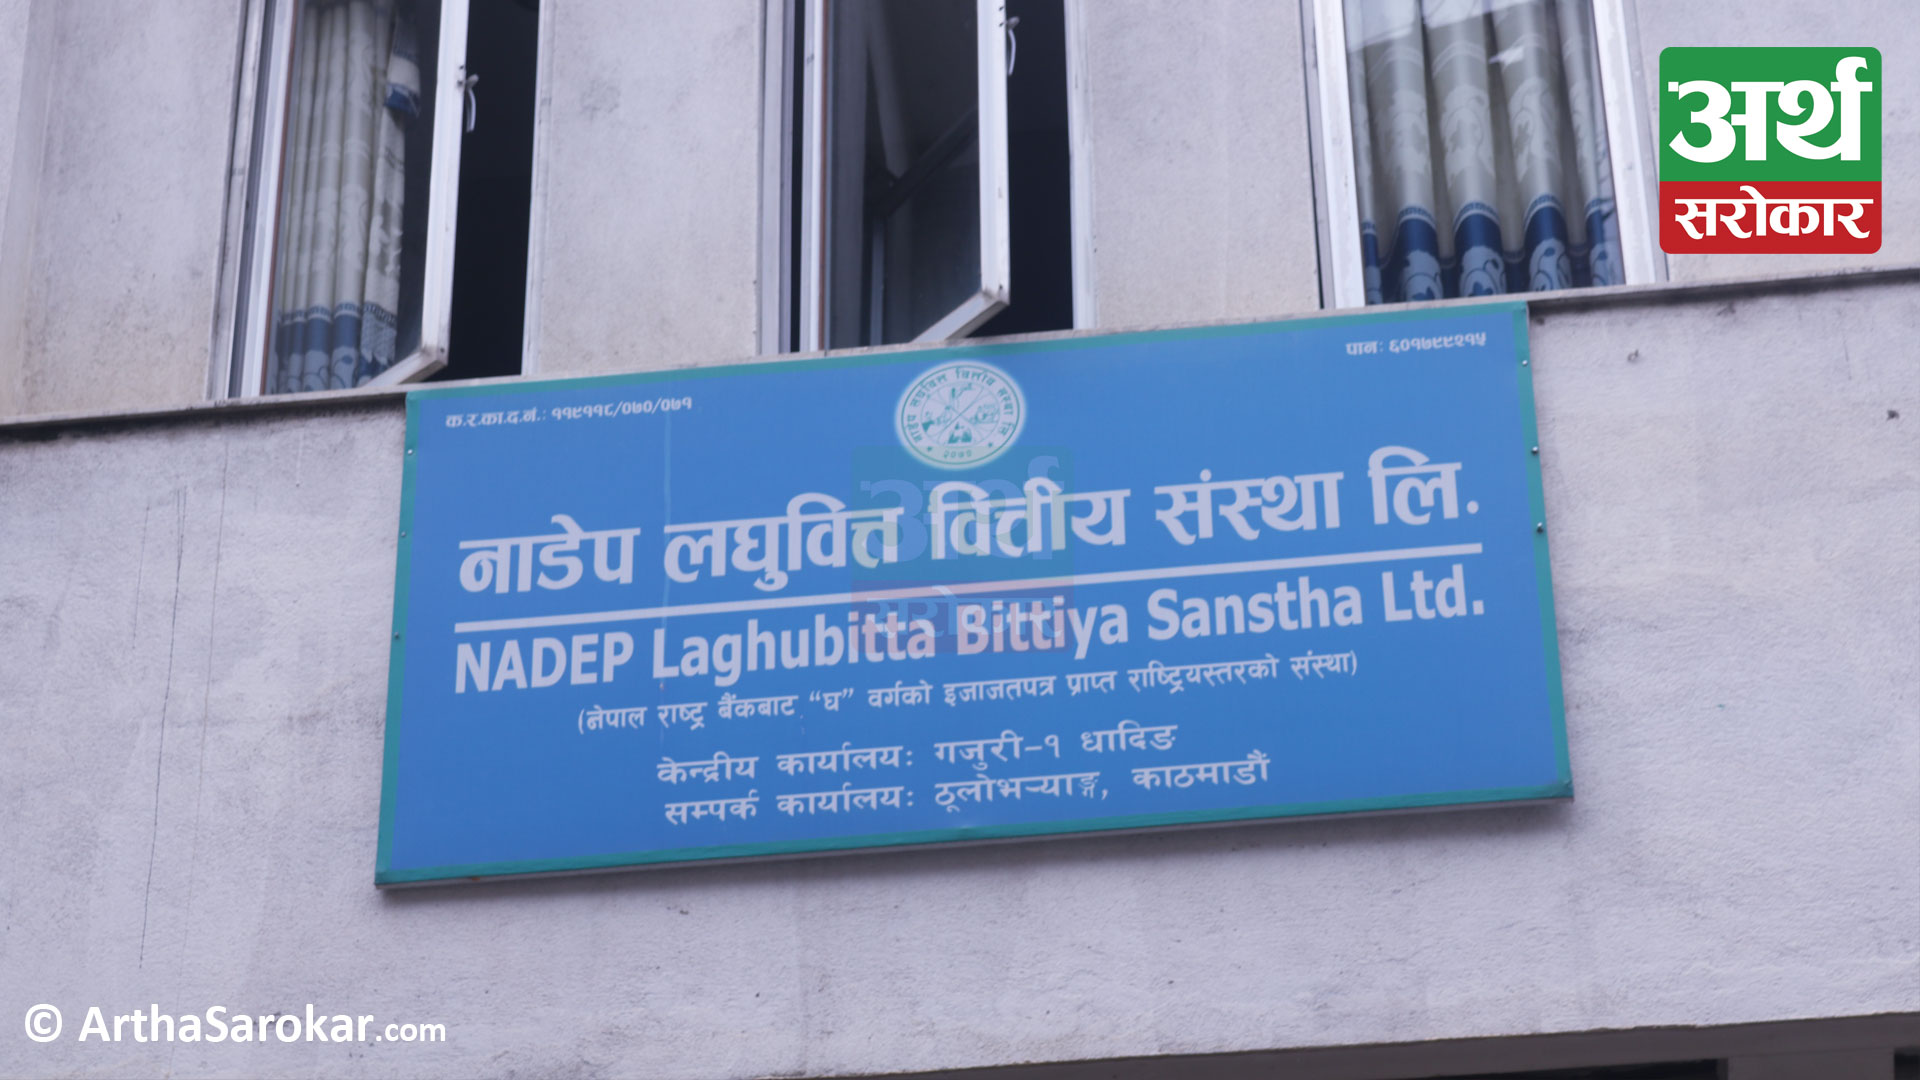 Nadep Microfinance made its financial statements public